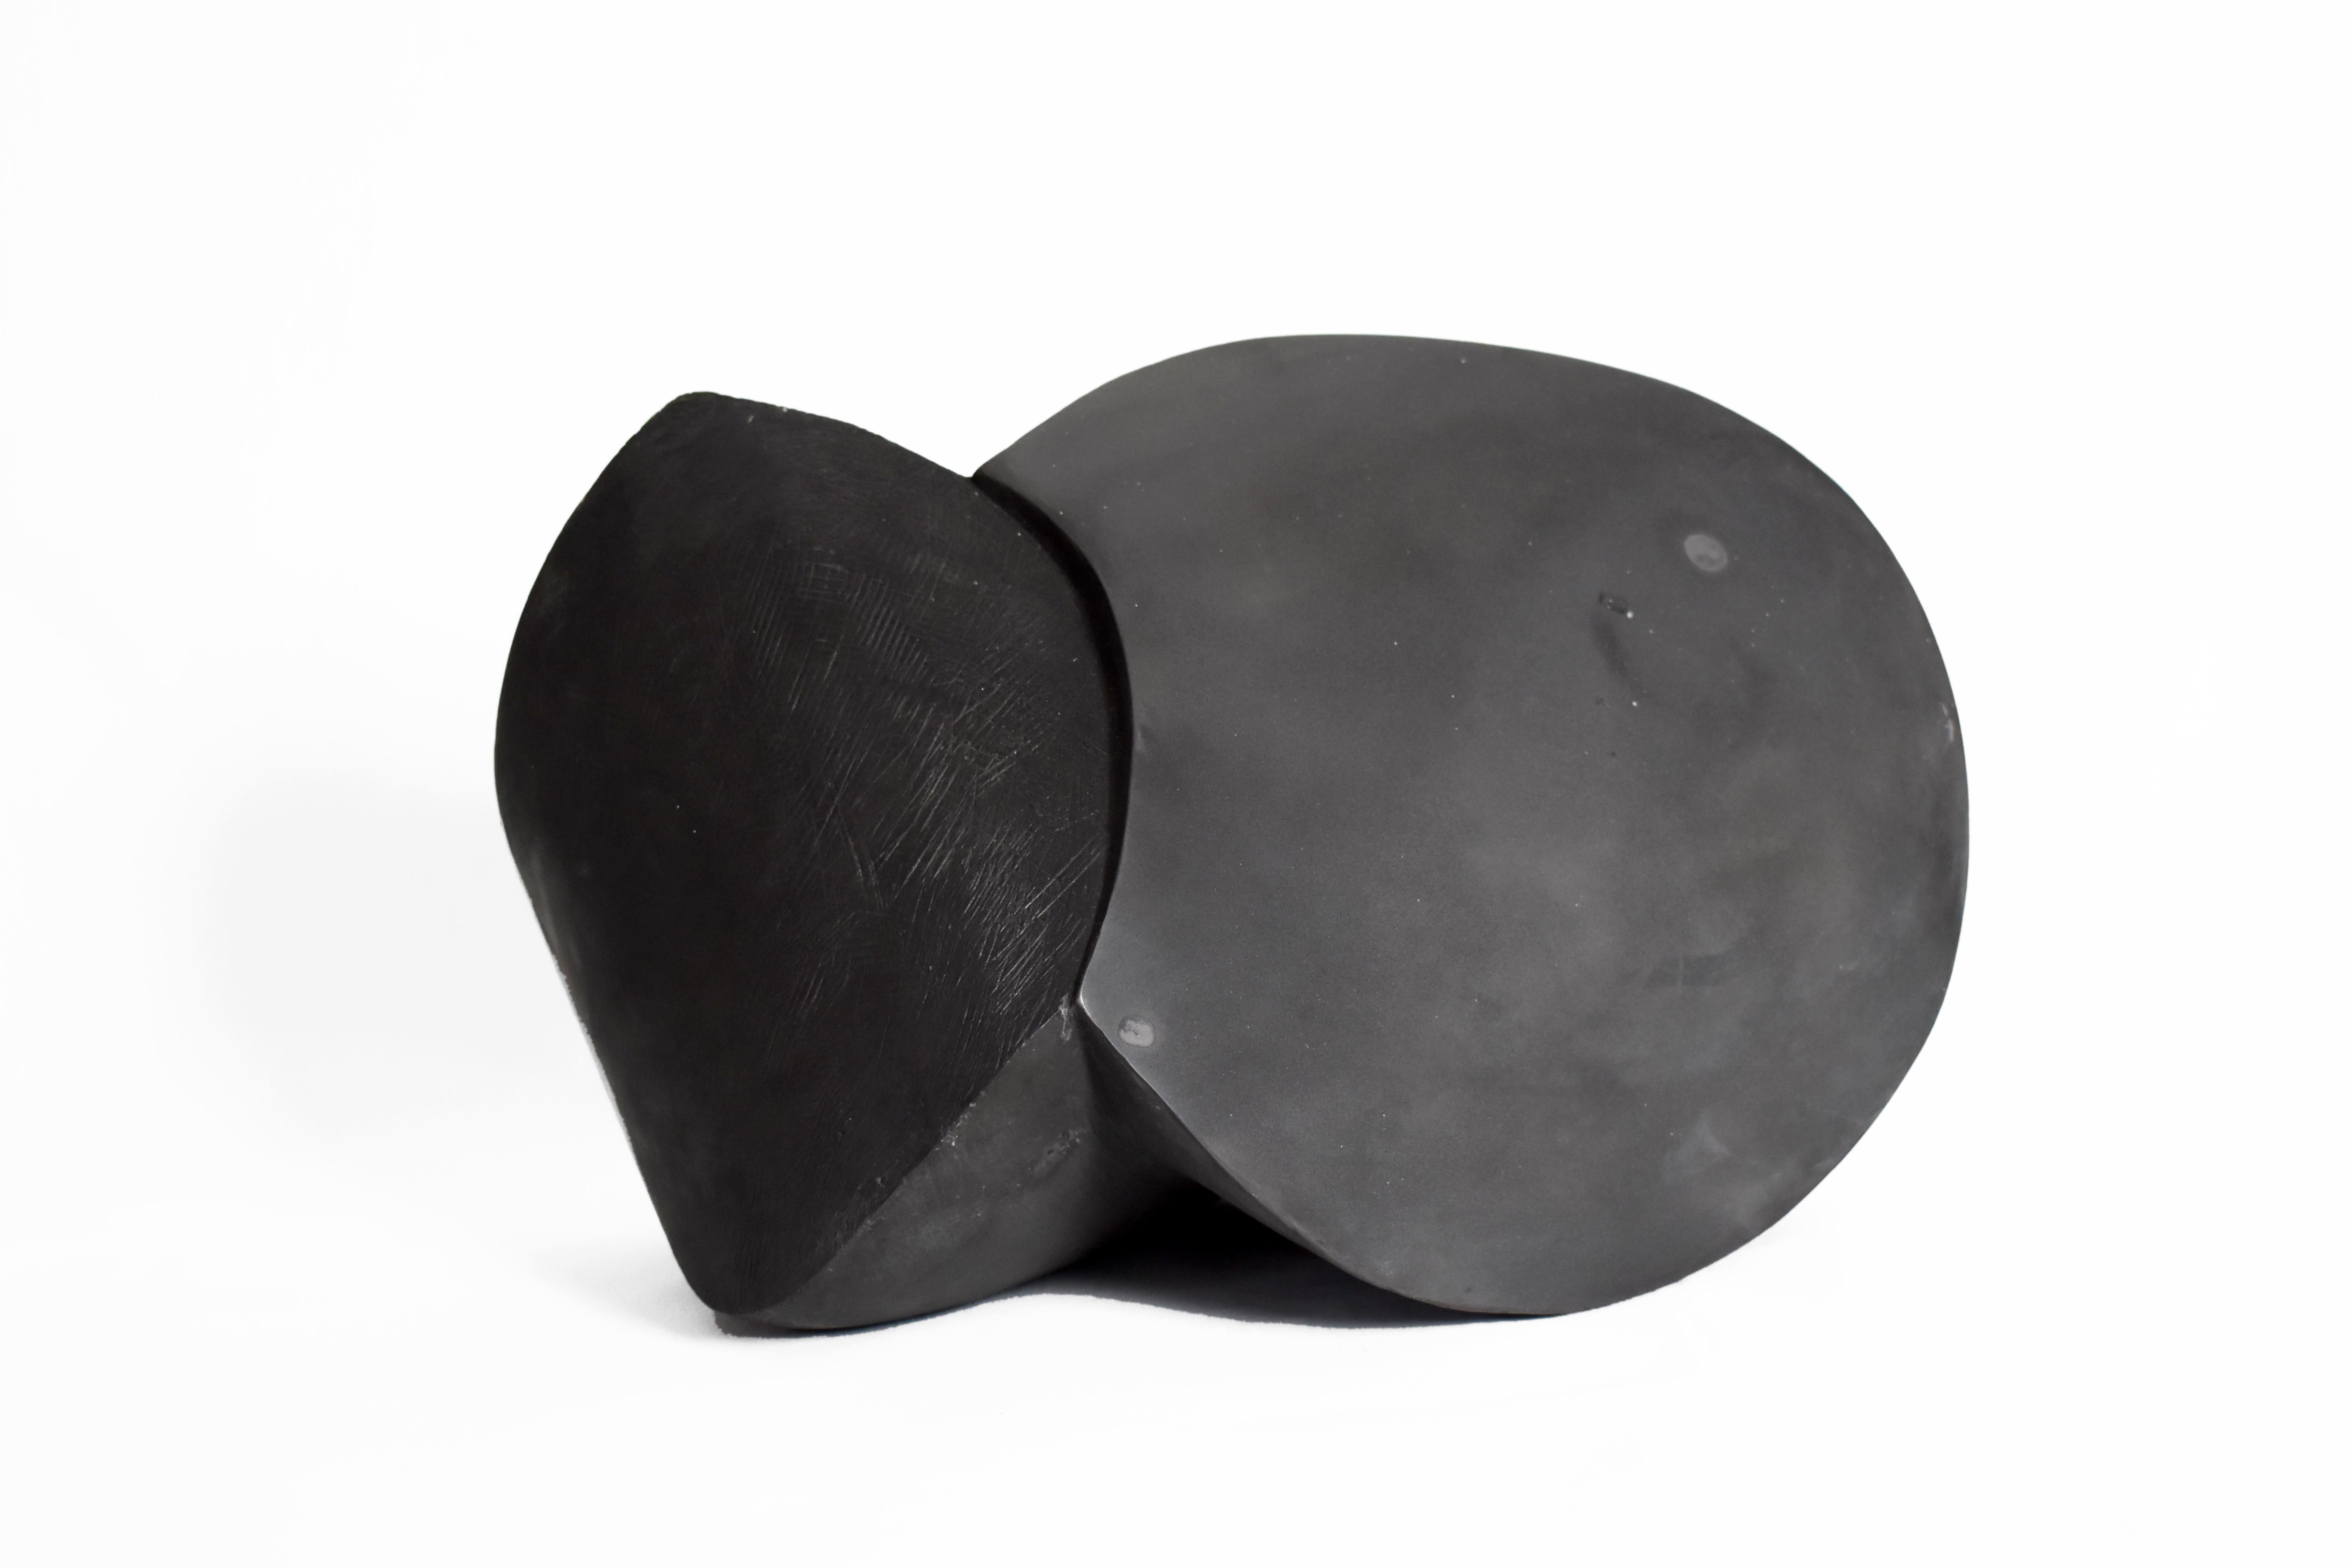 Samuel Latour - Eclipse - Original Ceramic Sculpture
19 x 34  x 21 cm
Edition of 8
Signed 

Samuel LATOUR

Formed at Boulle arts and craft school in Paris, he developed his know-how with designers and artist as a craftman. Then, he decides to